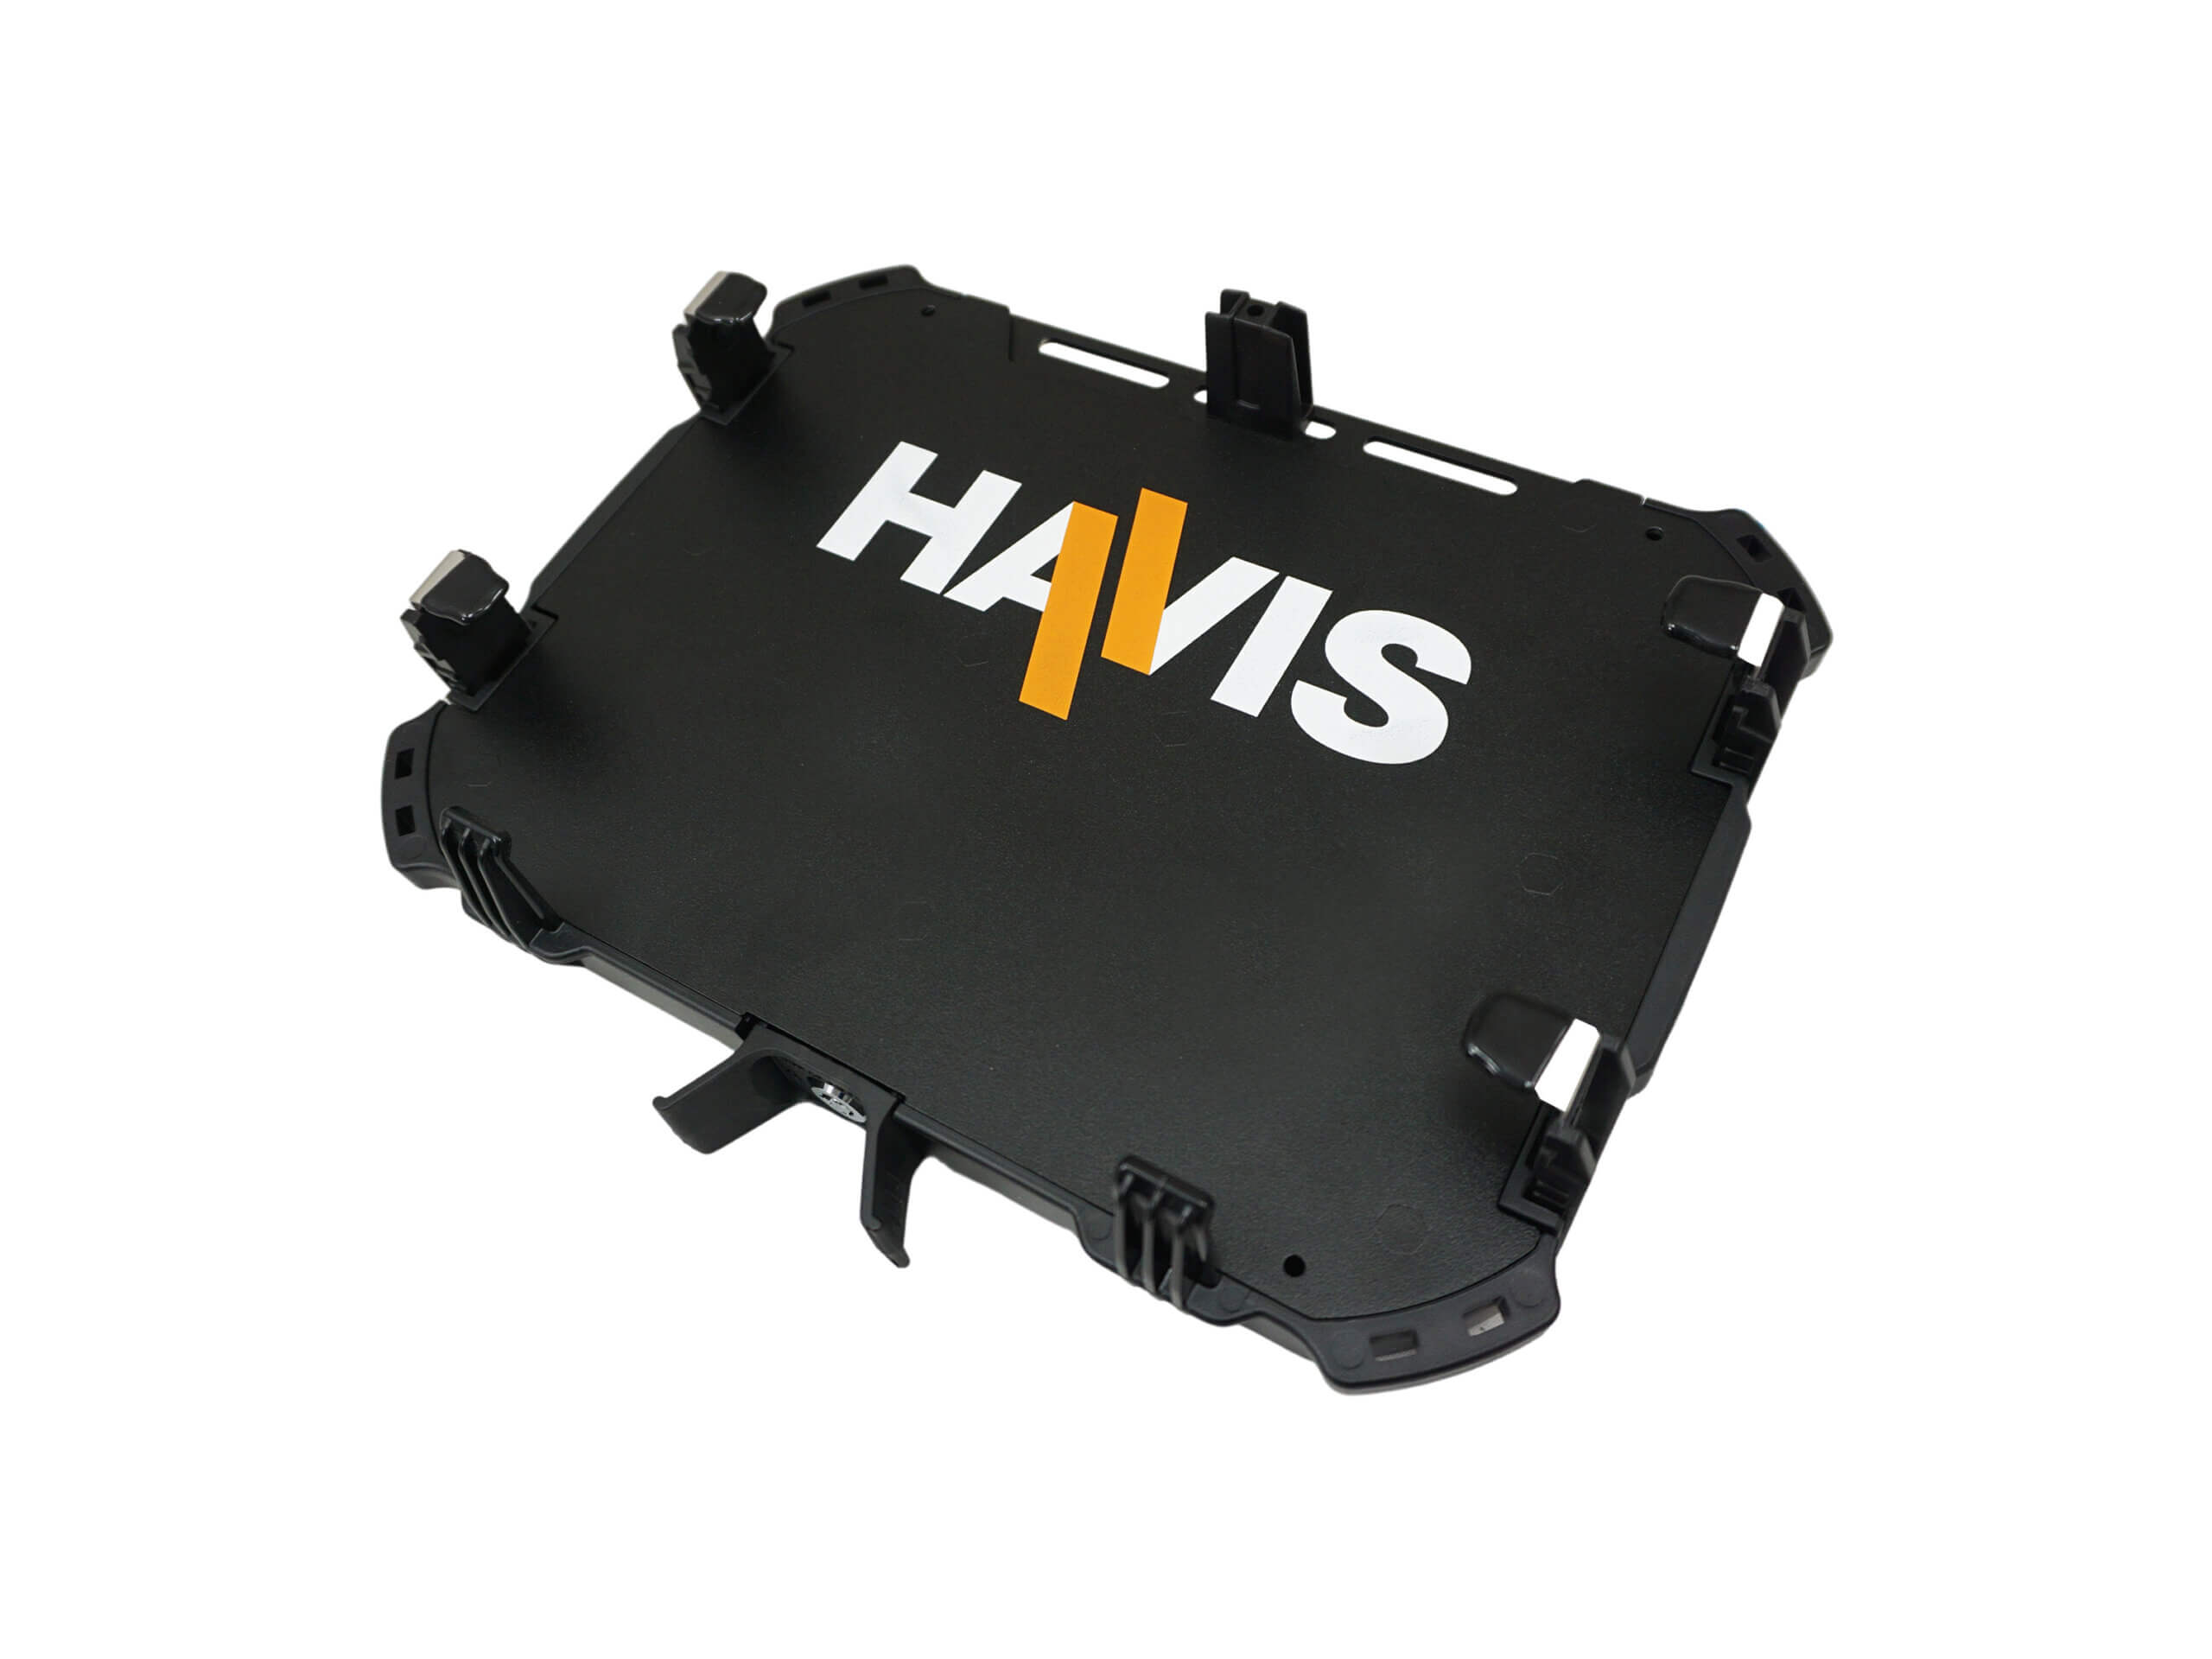 Universal Rugged Cradle for approximately 9″-11″ Computing Devices, with Added Depth